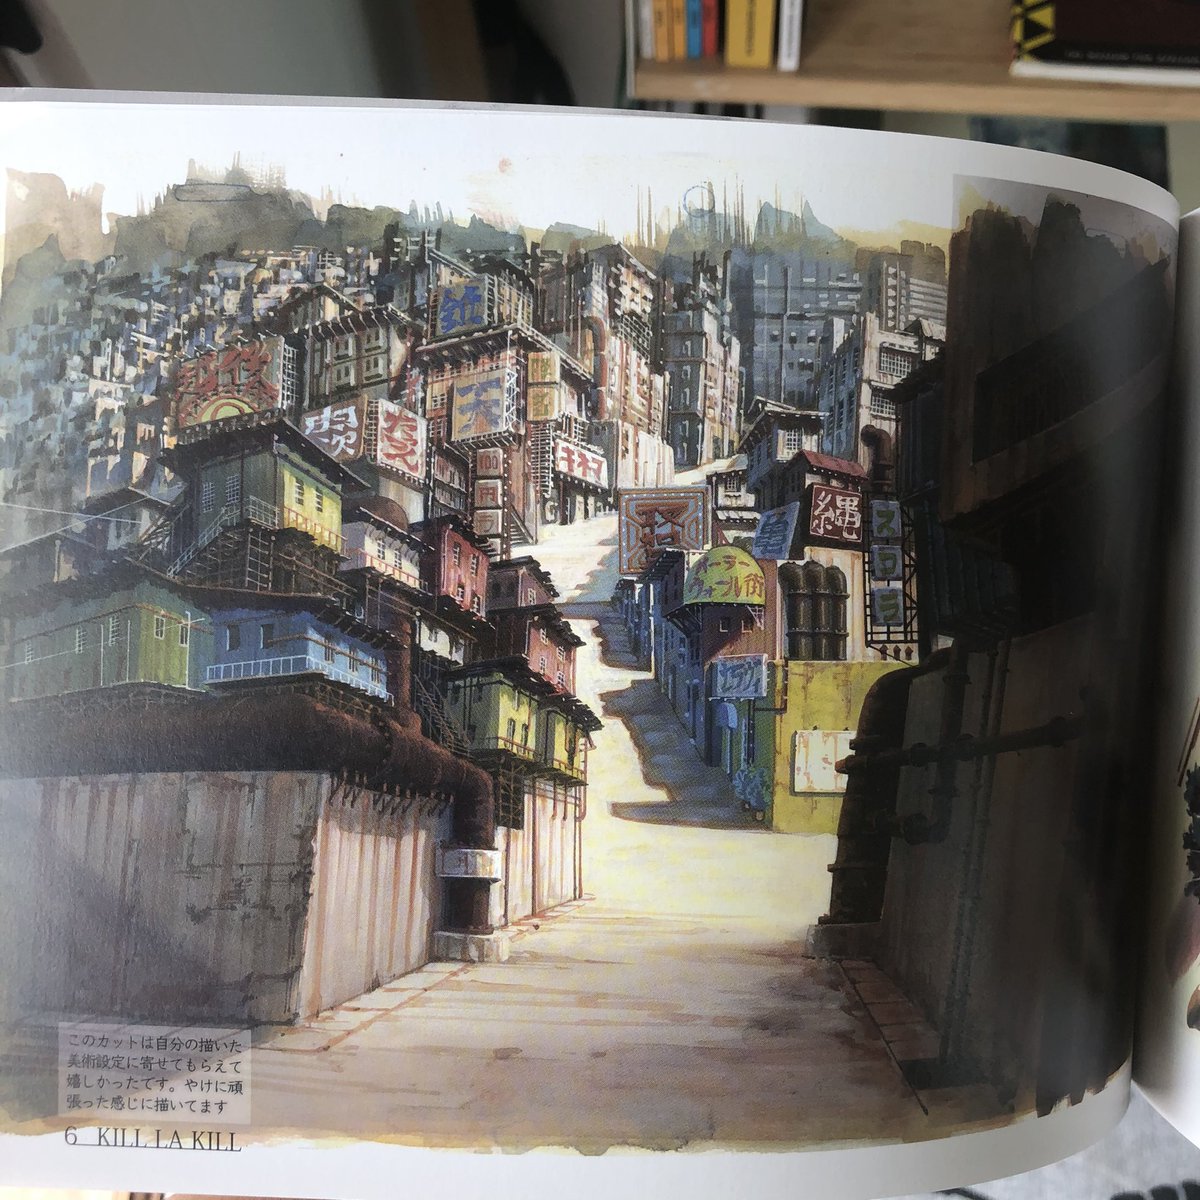 Yuuji Kaneko - Kill la Kill background artbook. One of the two BG art director of the show. I met him briefly when I visited Studio Trigger in 2013. Some insane backgrounds, sometime painted in 2-3 hours (he admitted).